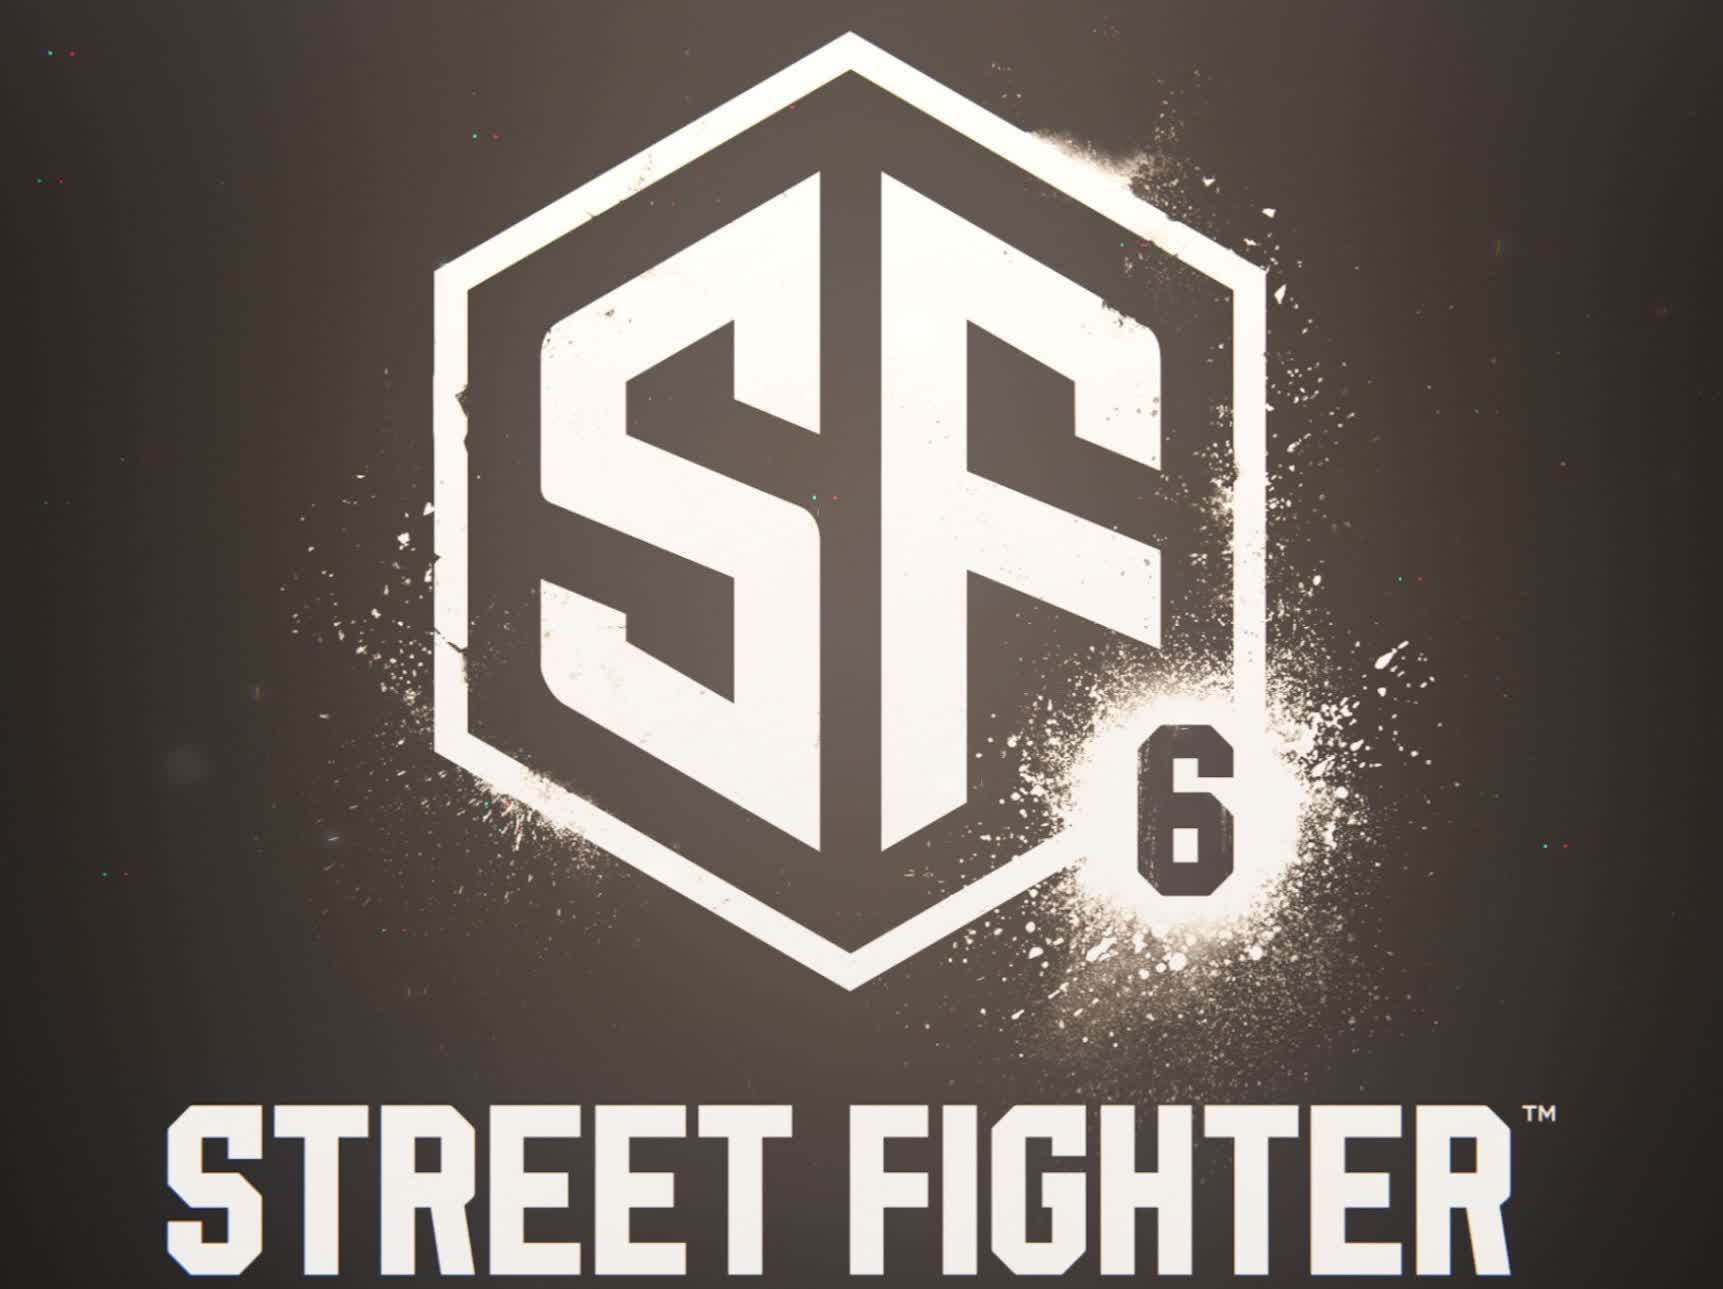 Is the Street Fighter 6 logo an edited stock image?